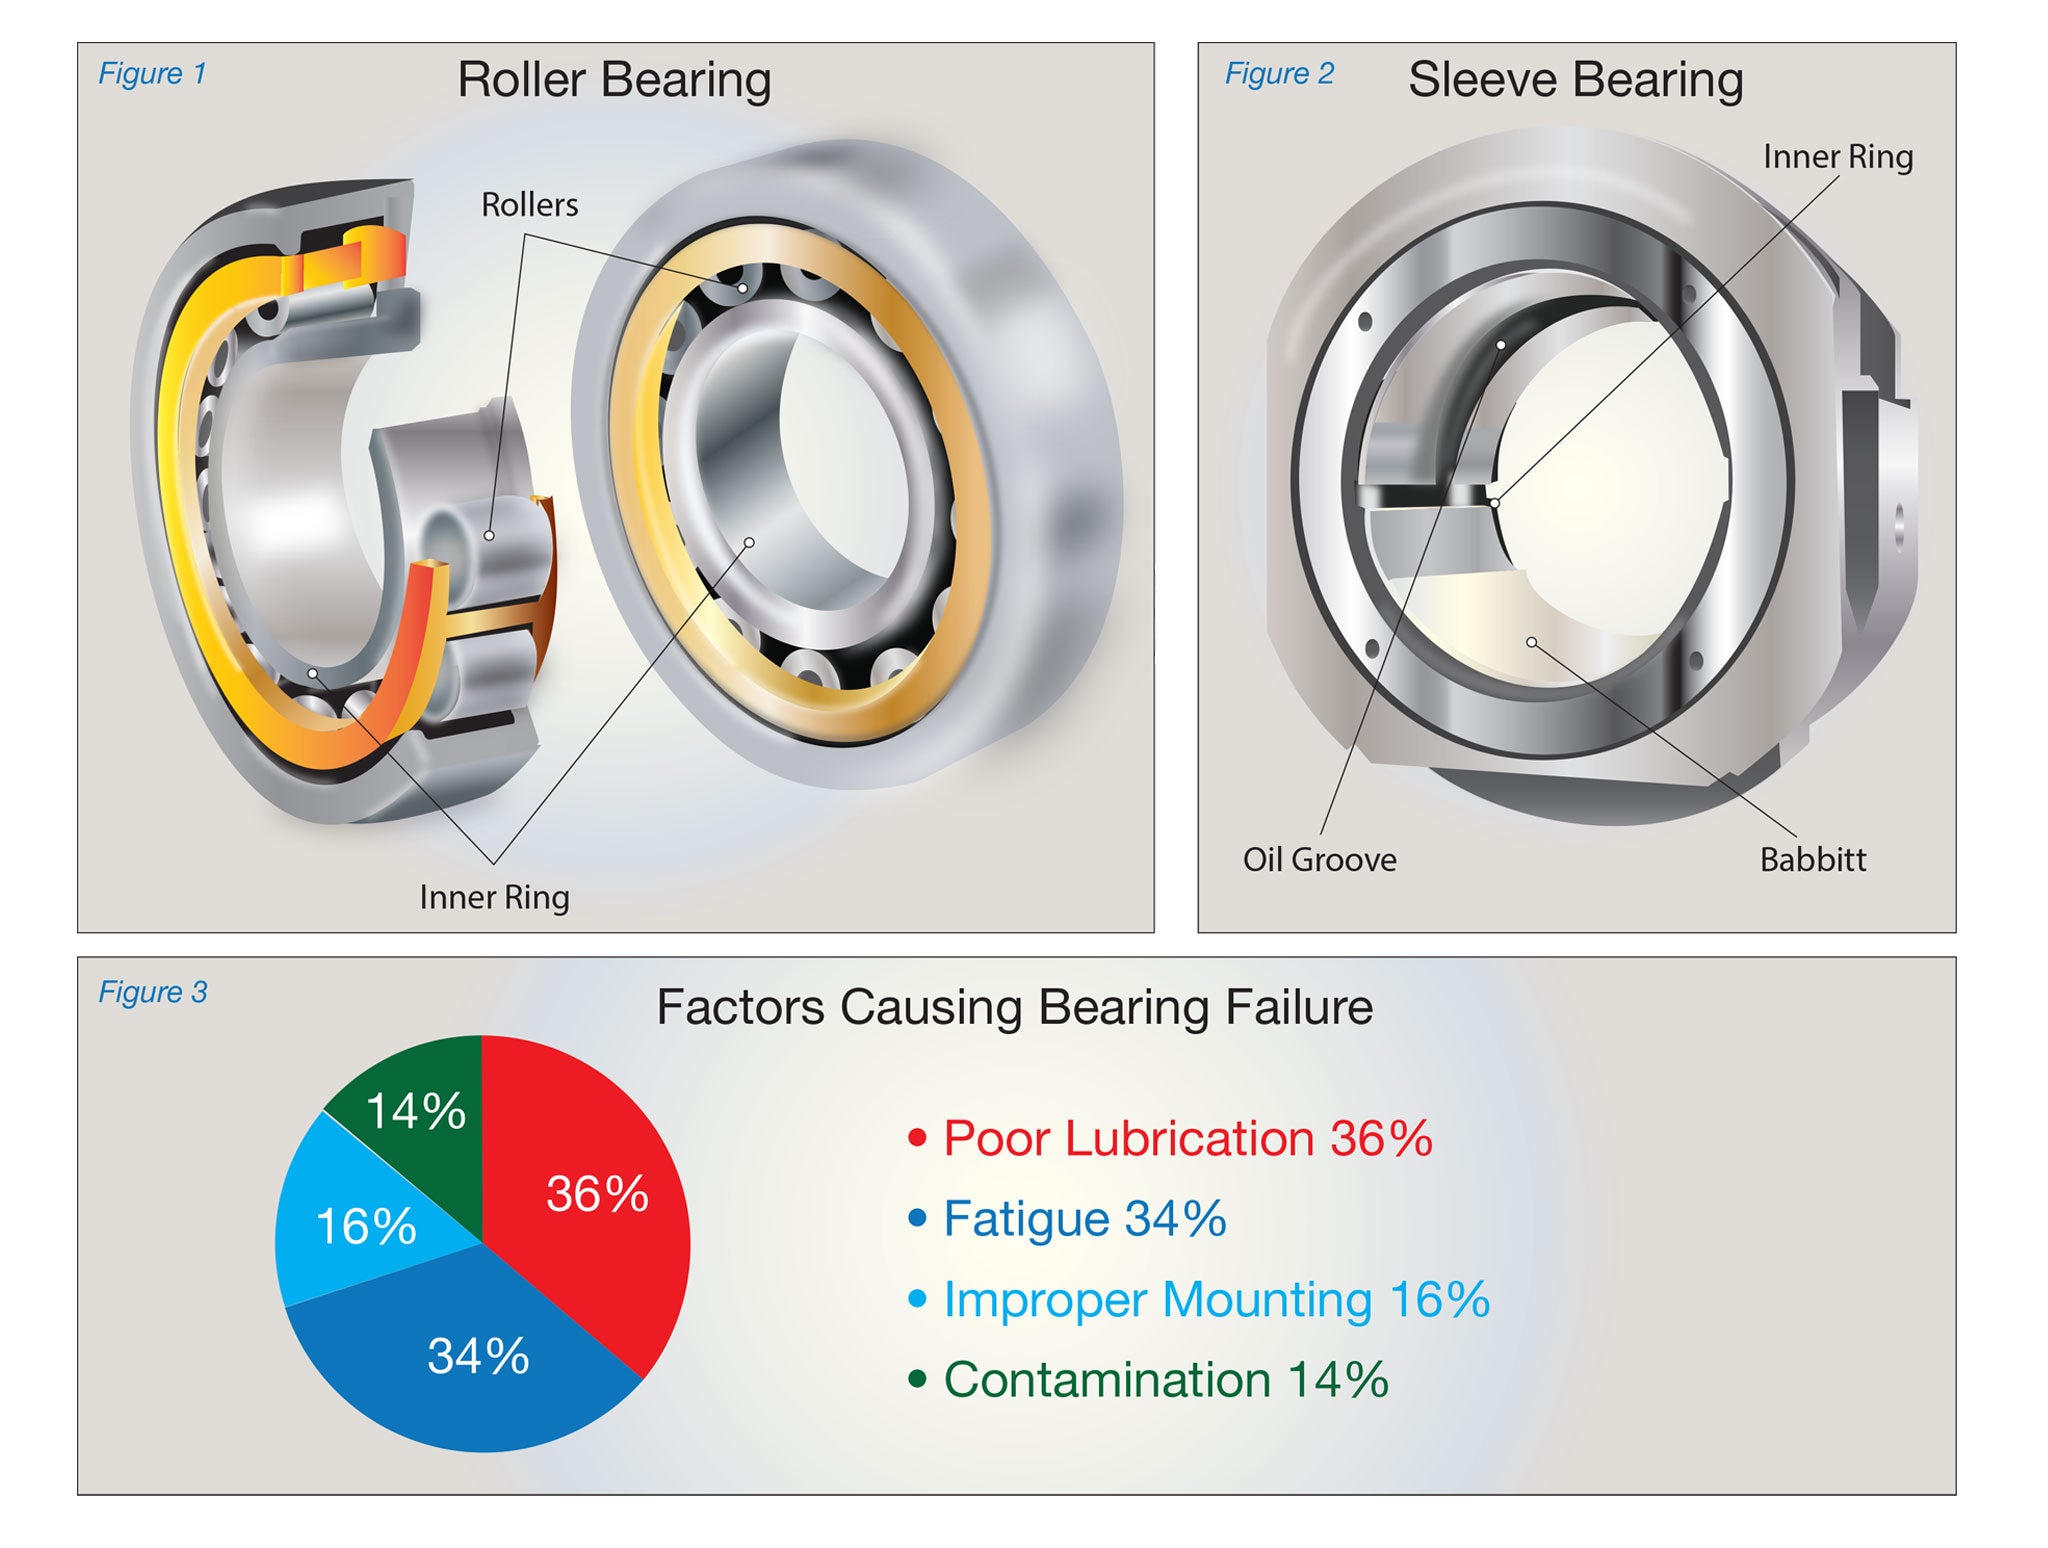 Information Sheet #4 - Bearing Types, Maintenance, and Reliability.